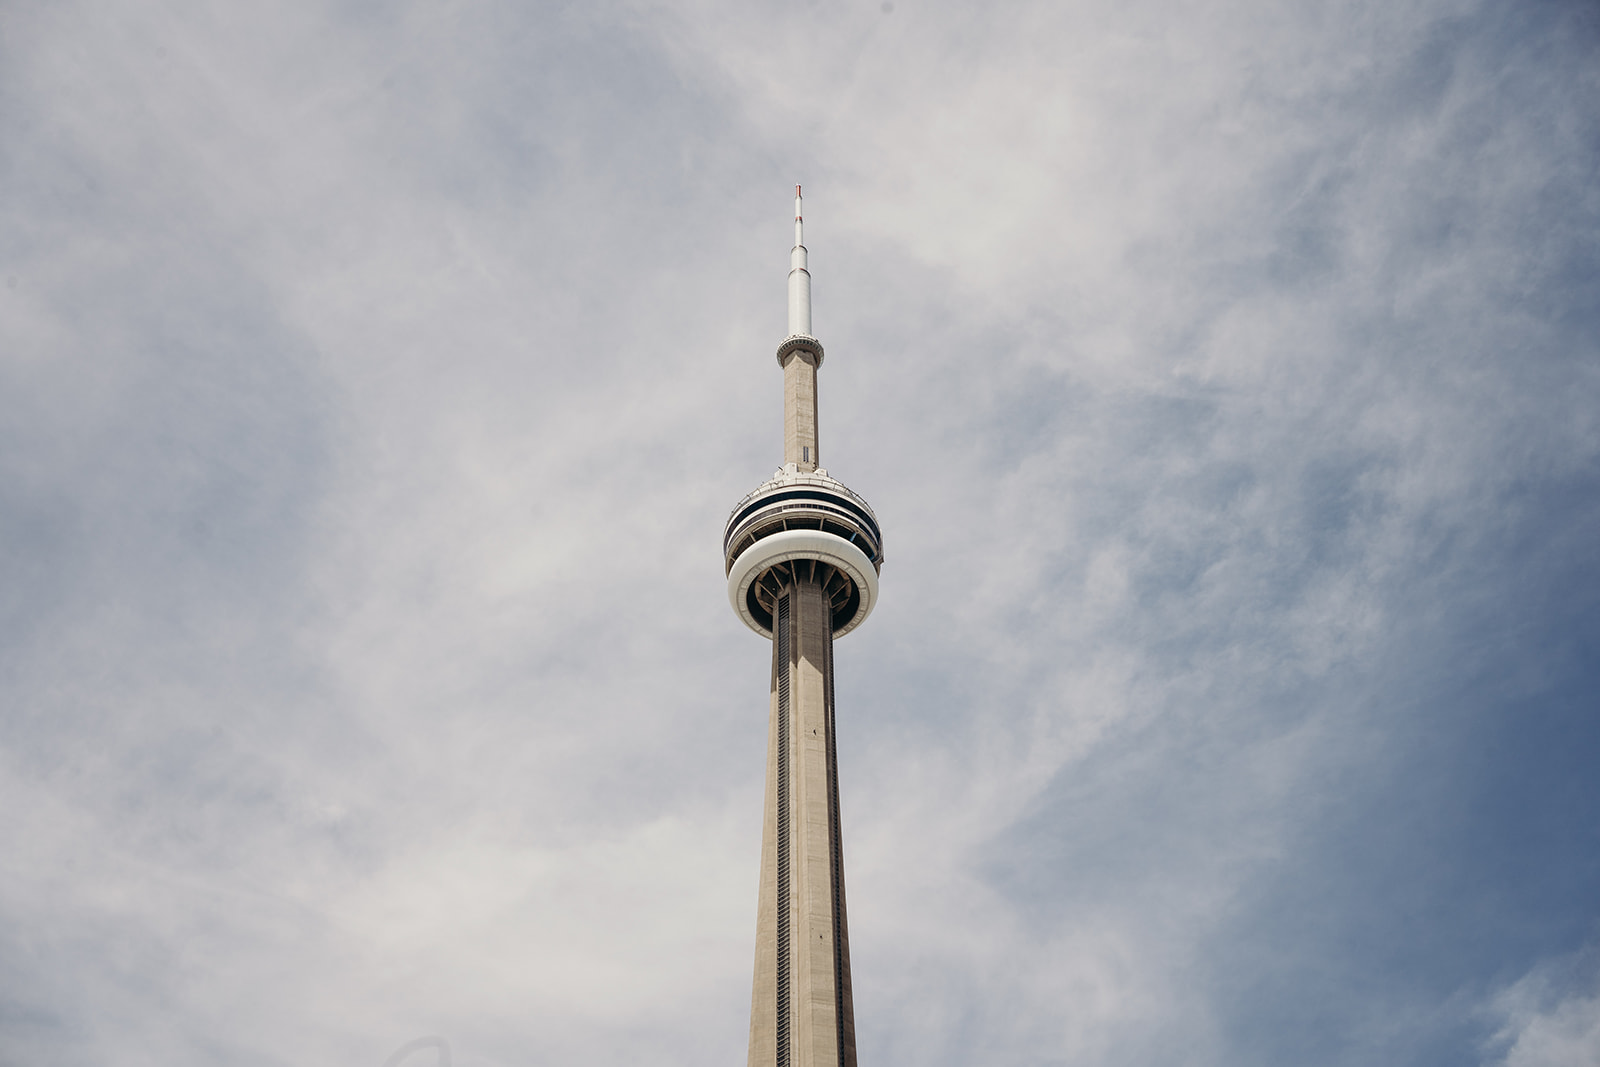 The top half of the C.N. Tower in Toronto, Ontario.